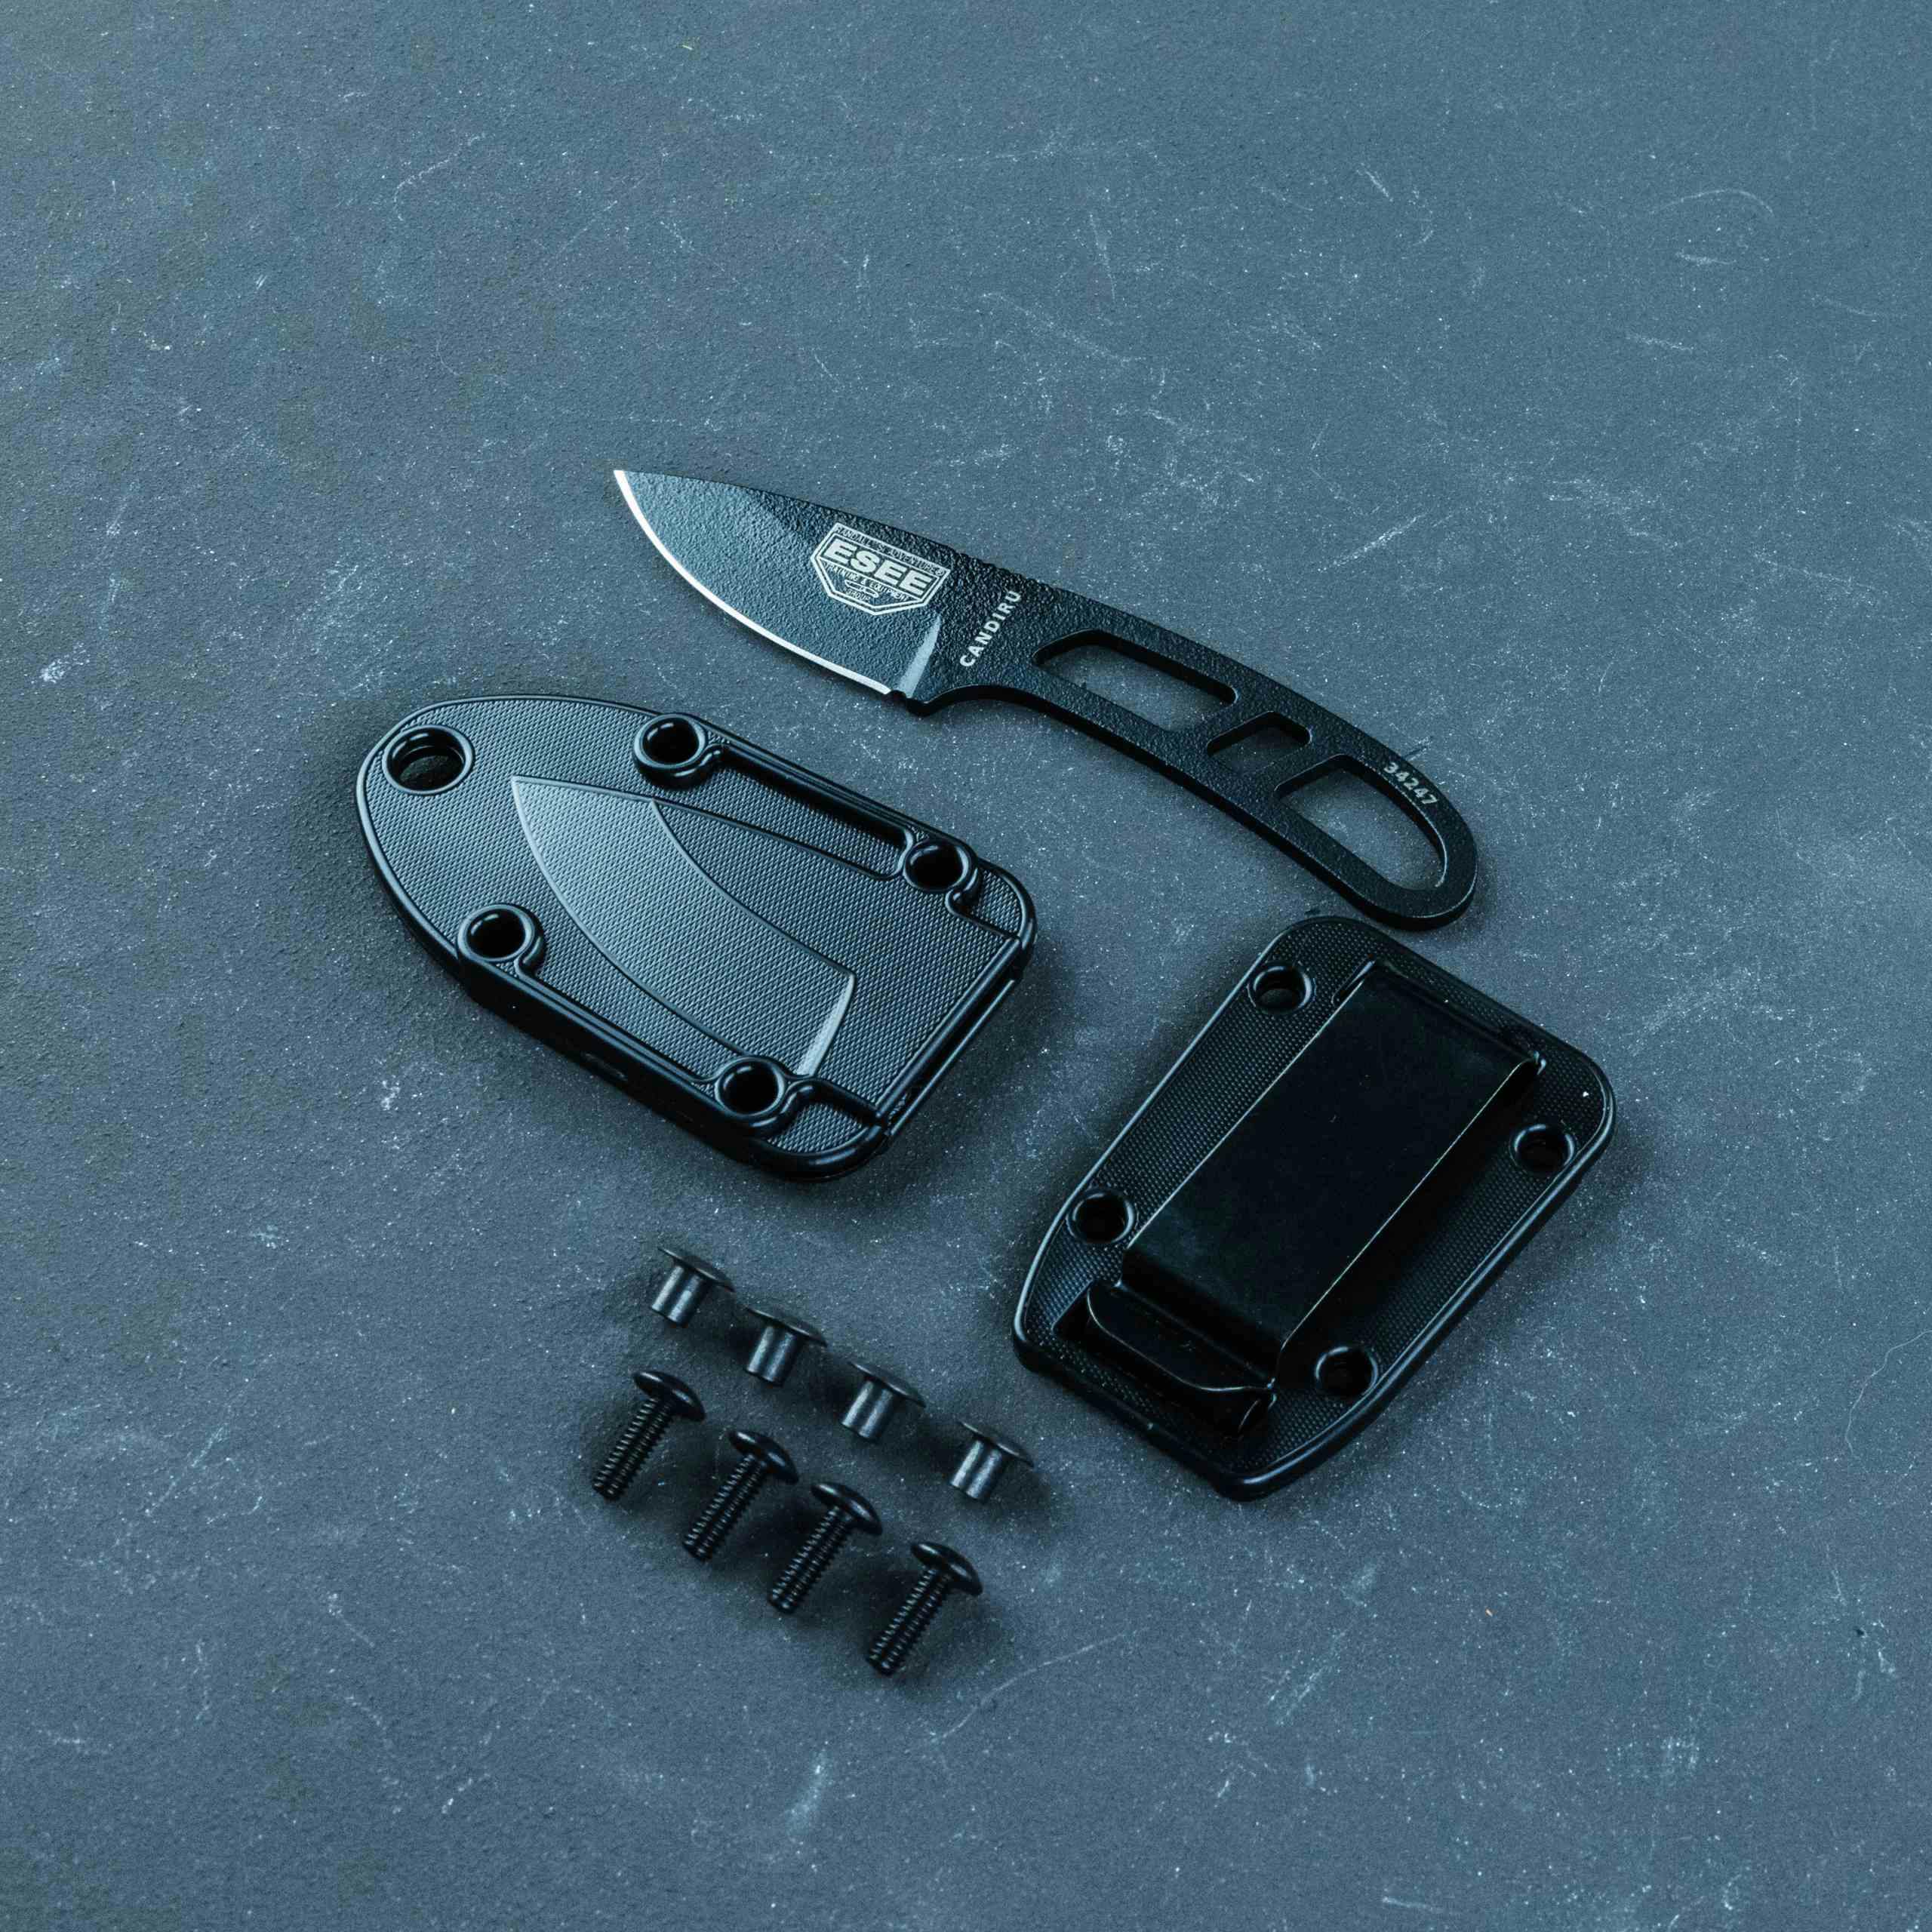 ESEE-6 Knife – T.REX ARMS